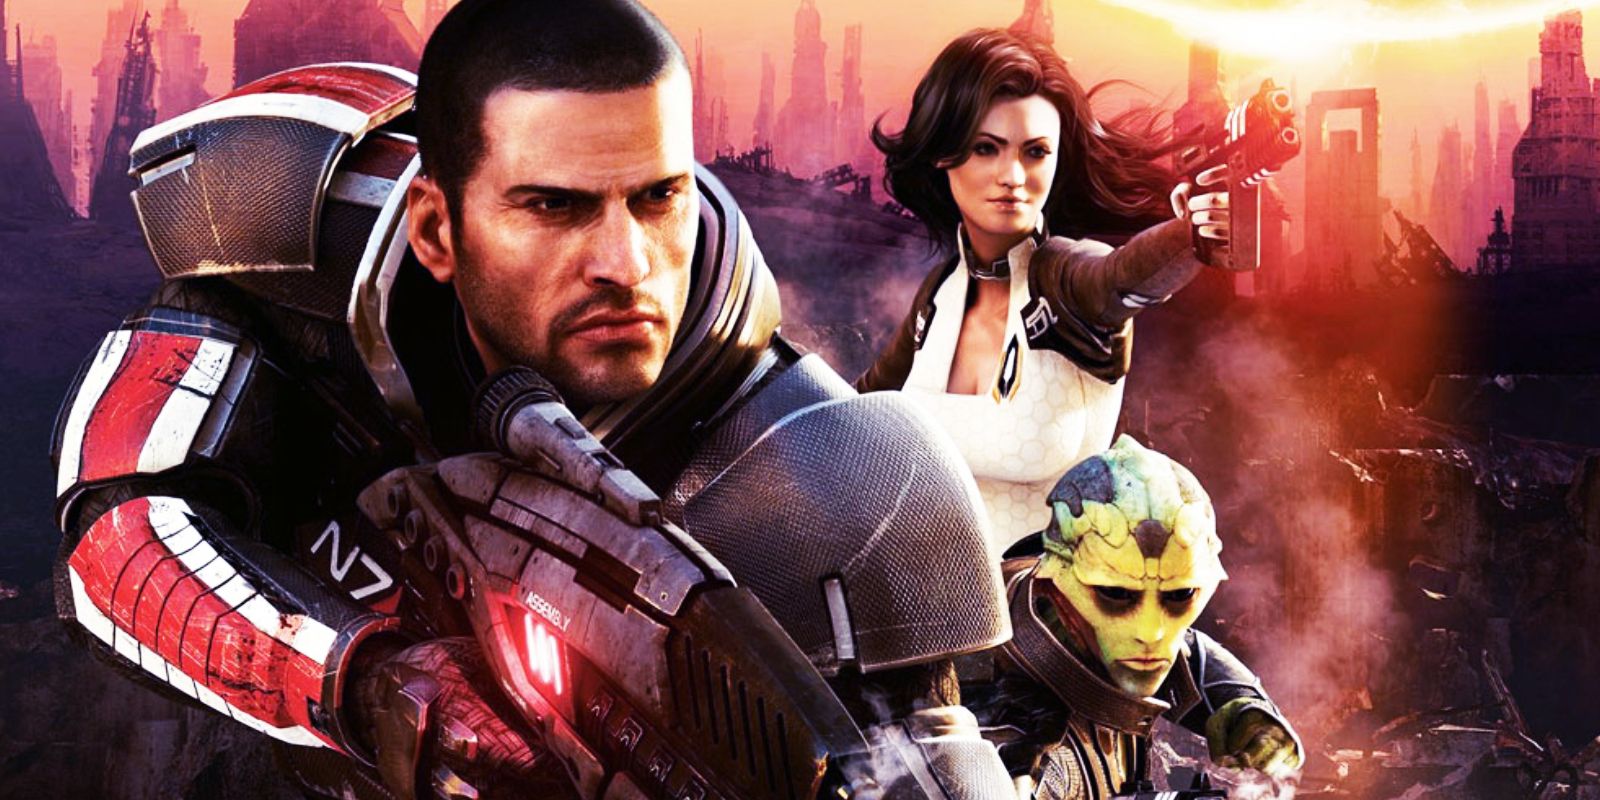 The cover artwork for Mass Effect 2 shows three leading characters